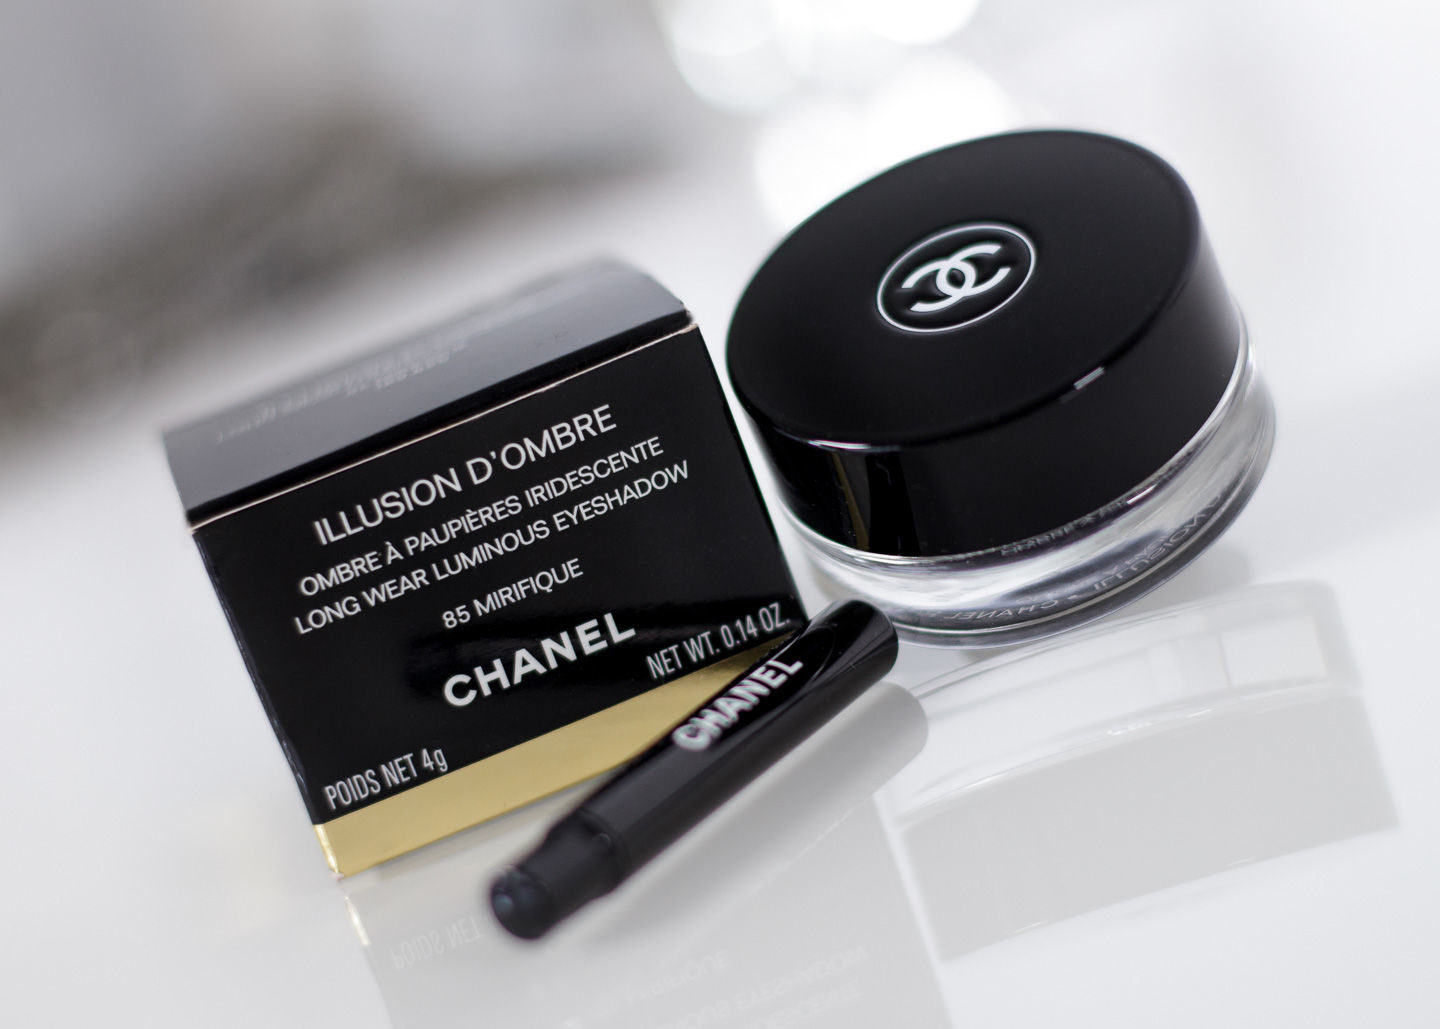 CHANEL Illusion d'Ombre Long Wear Luminous Eyeshadow - Reviews